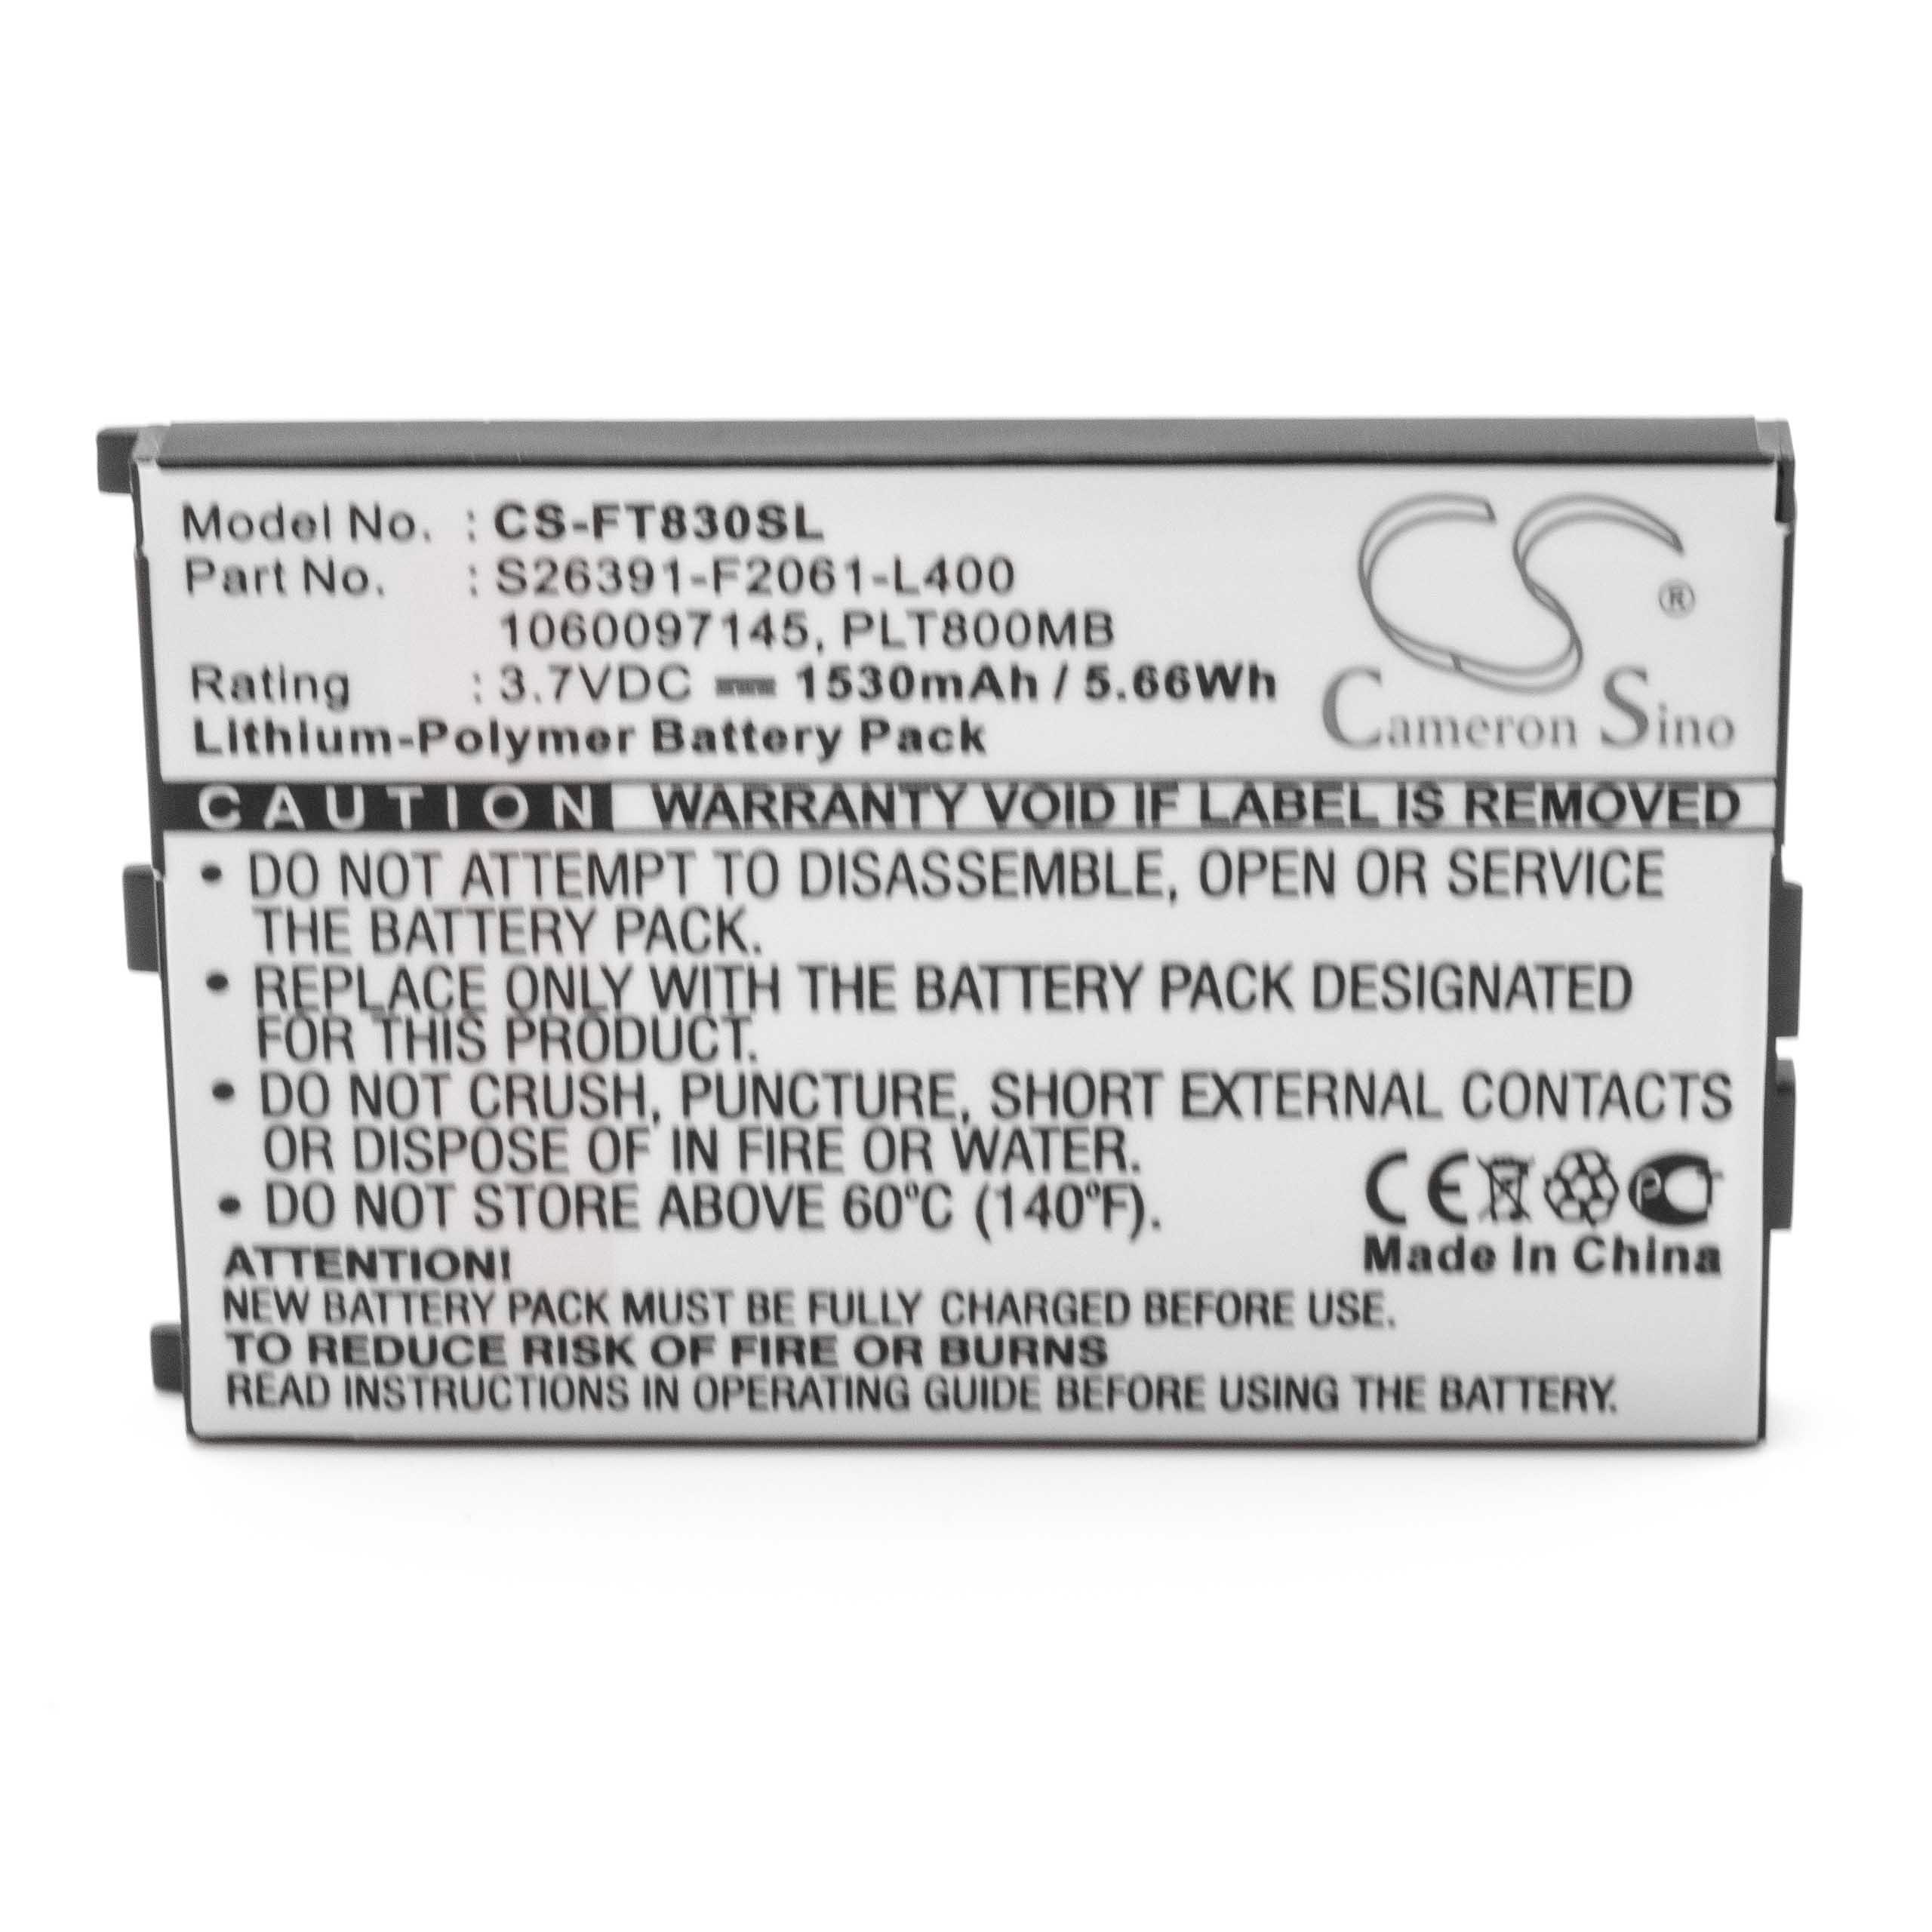 Mobile Computer Battery Replacement for Fujitsu Siemens 1060097145, 761UPA2371W, PLT800MB - 1530mAh, 3.7V